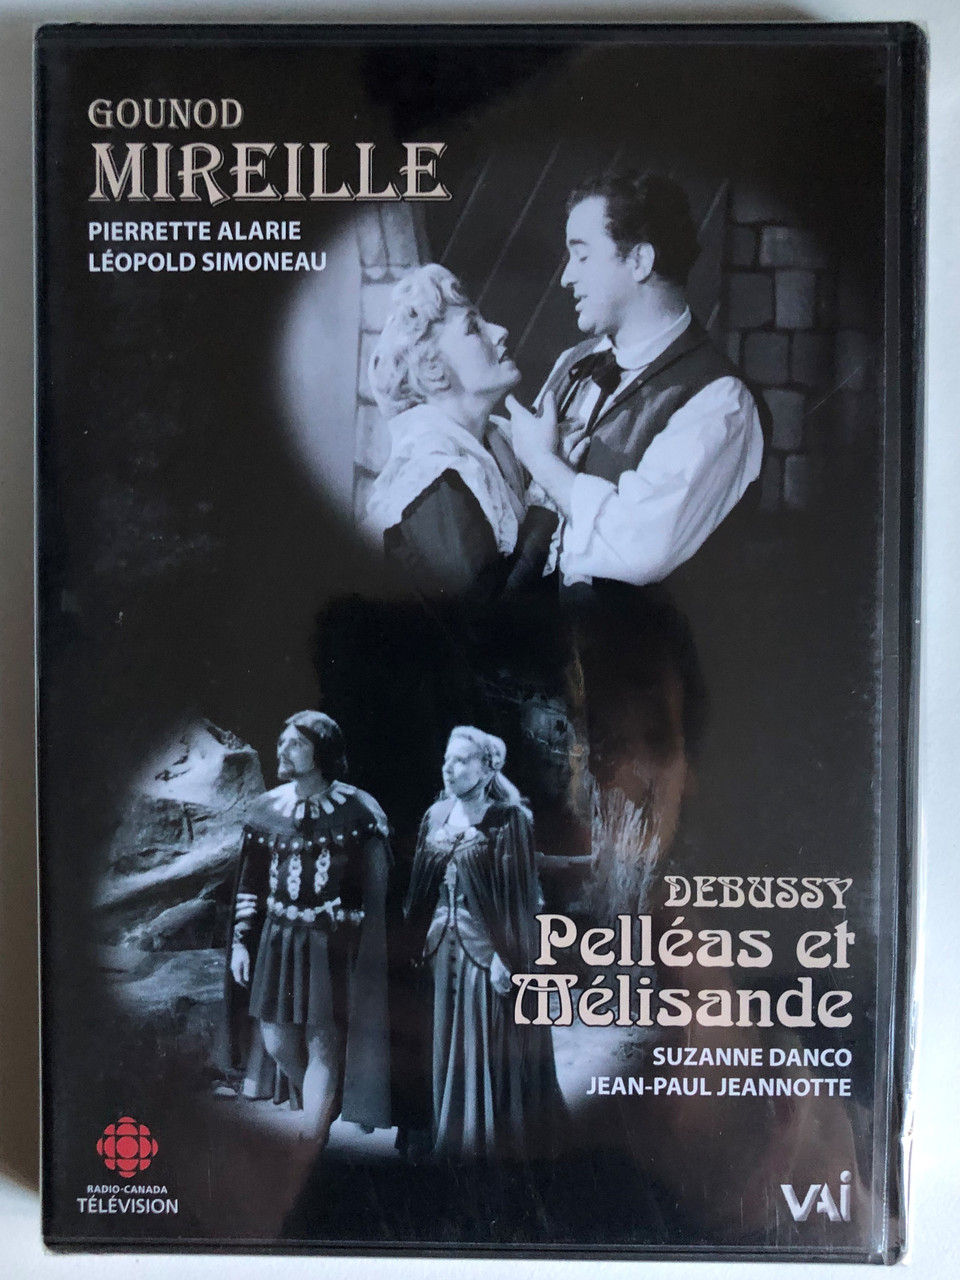 GOUNOD_MIREILLE_AbridgedDEBUSSY_PELLEAS_ET_MELISANDE_Act_Two_Radio-Canada_Orchestra_Jean_Beaudet_conductor_Telecast_of_January_24_1957_PACKAGING_DESIGN_AND_DVD_AUTHO___91915.1691923055.1280.1280.JPG (960×1280)